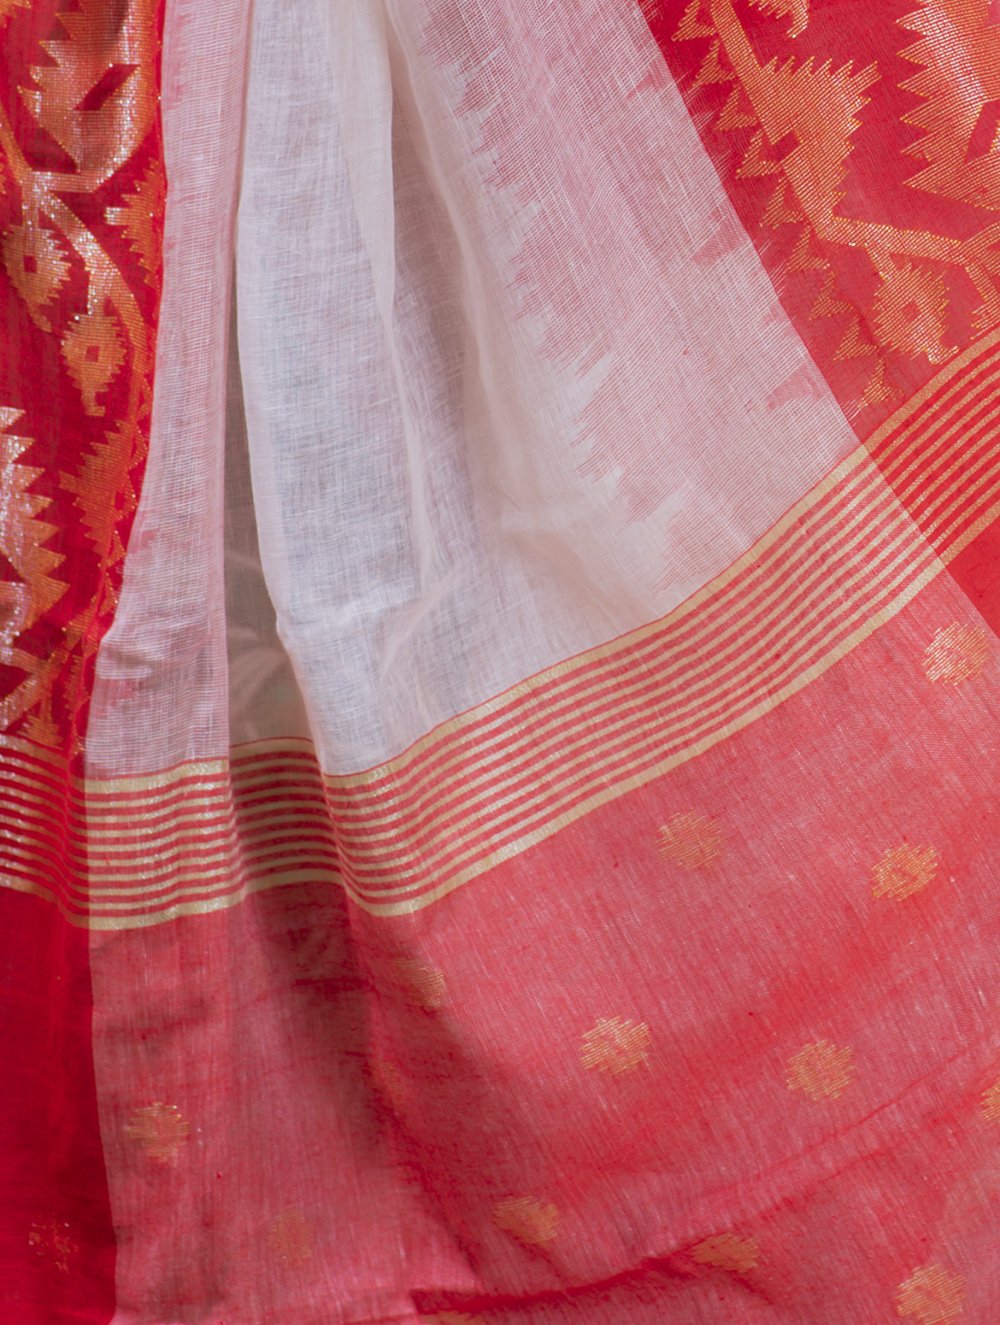 Load image into Gallery viewer, Stunning Beauty. Pure Linen Handwoven Jamdani Saree - White, Red &amp; Dull Gold (With Blouse Piece)